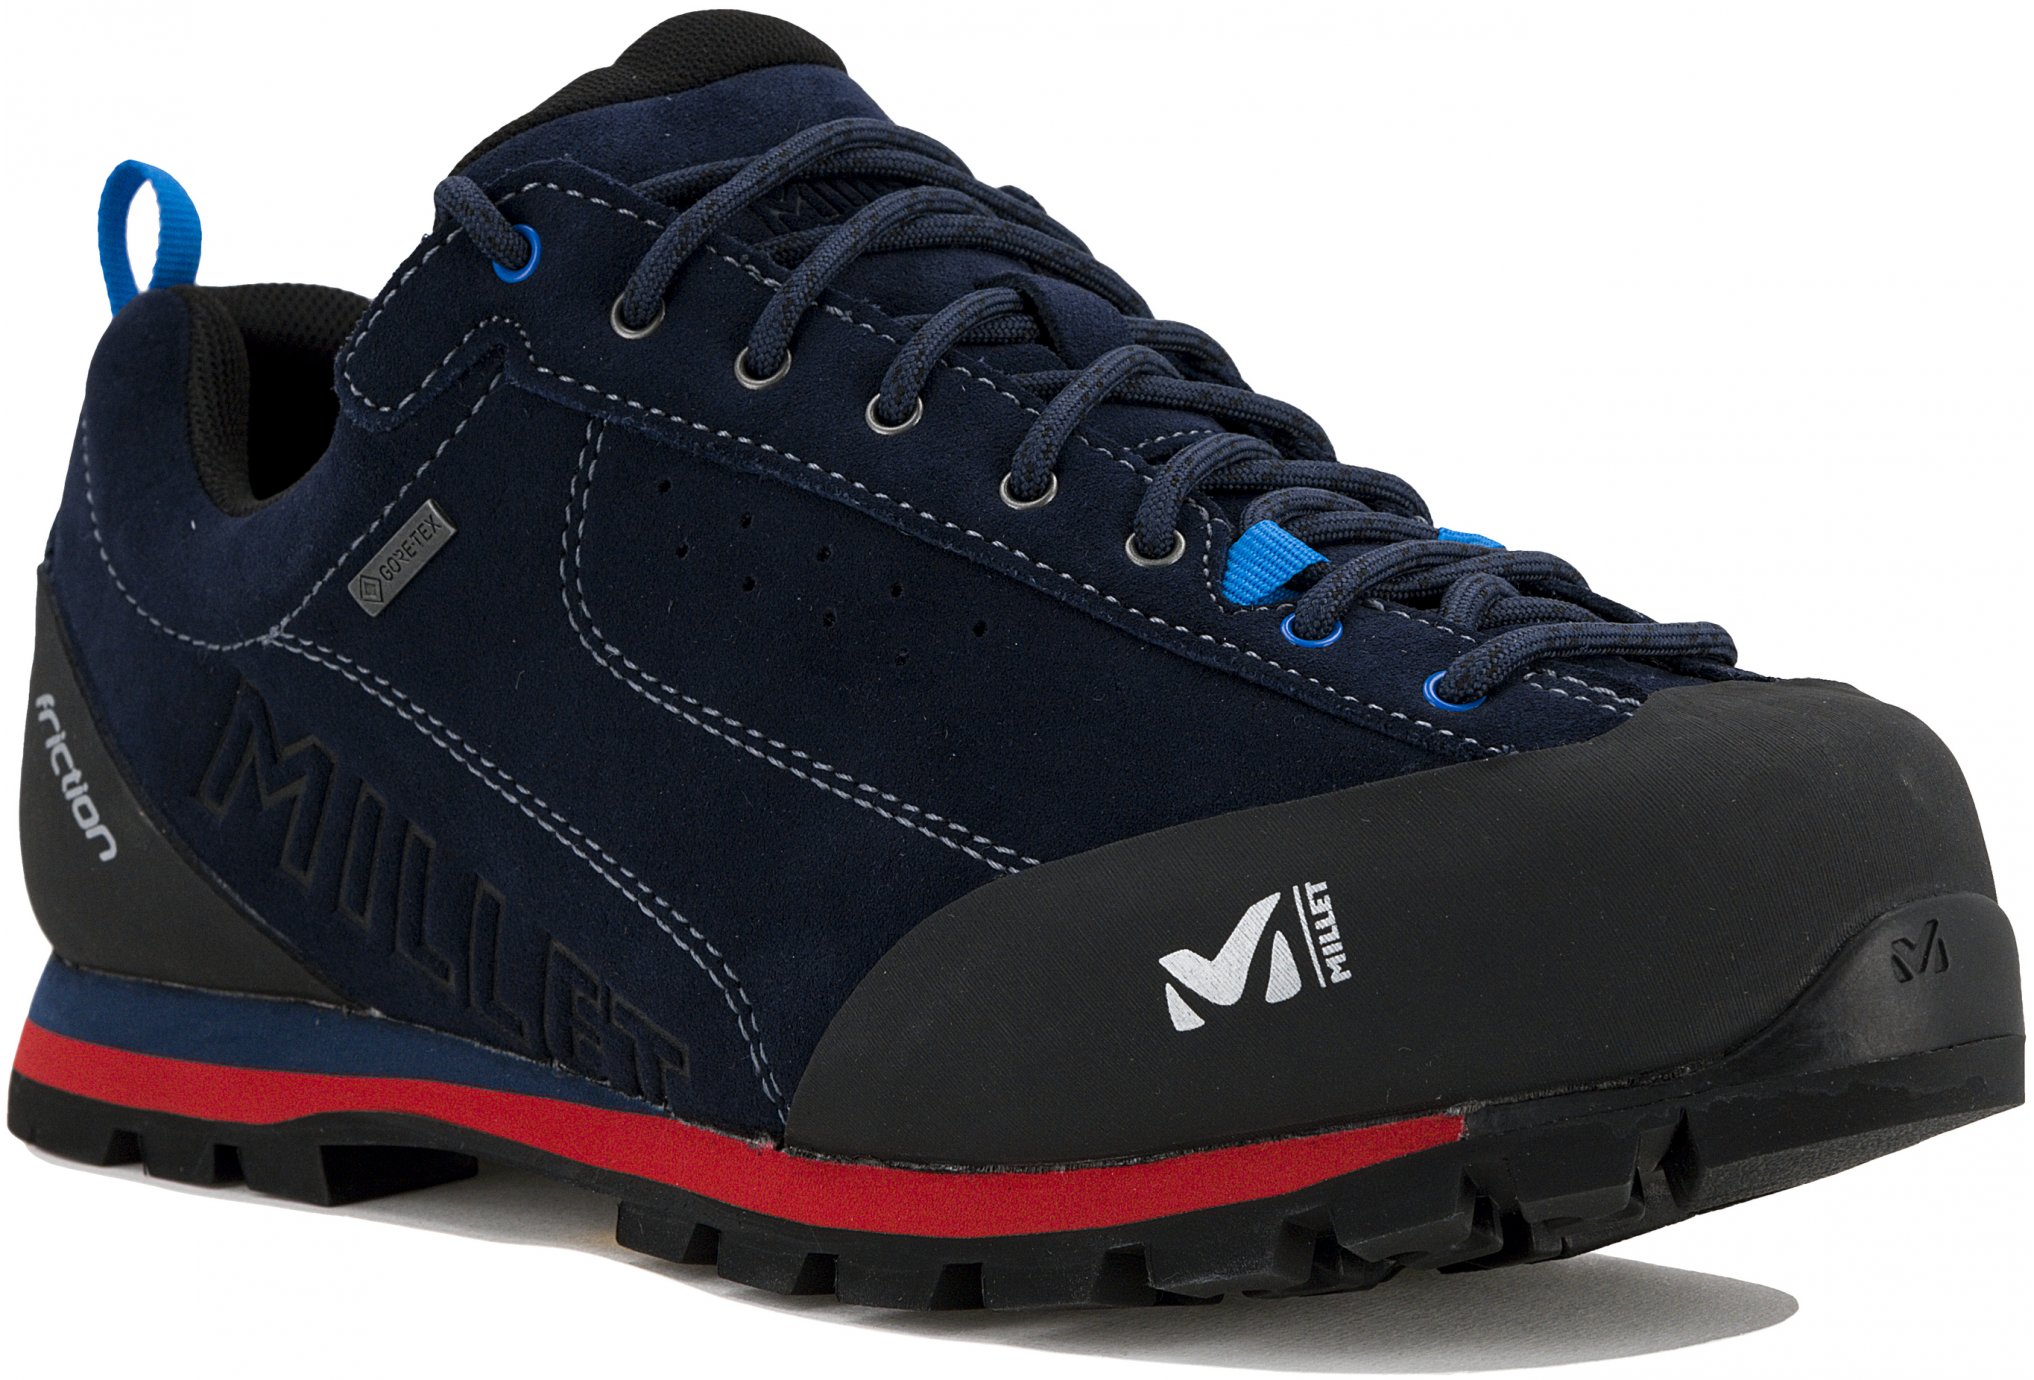 Millet Friction Gore-Tex M Chaussures homme